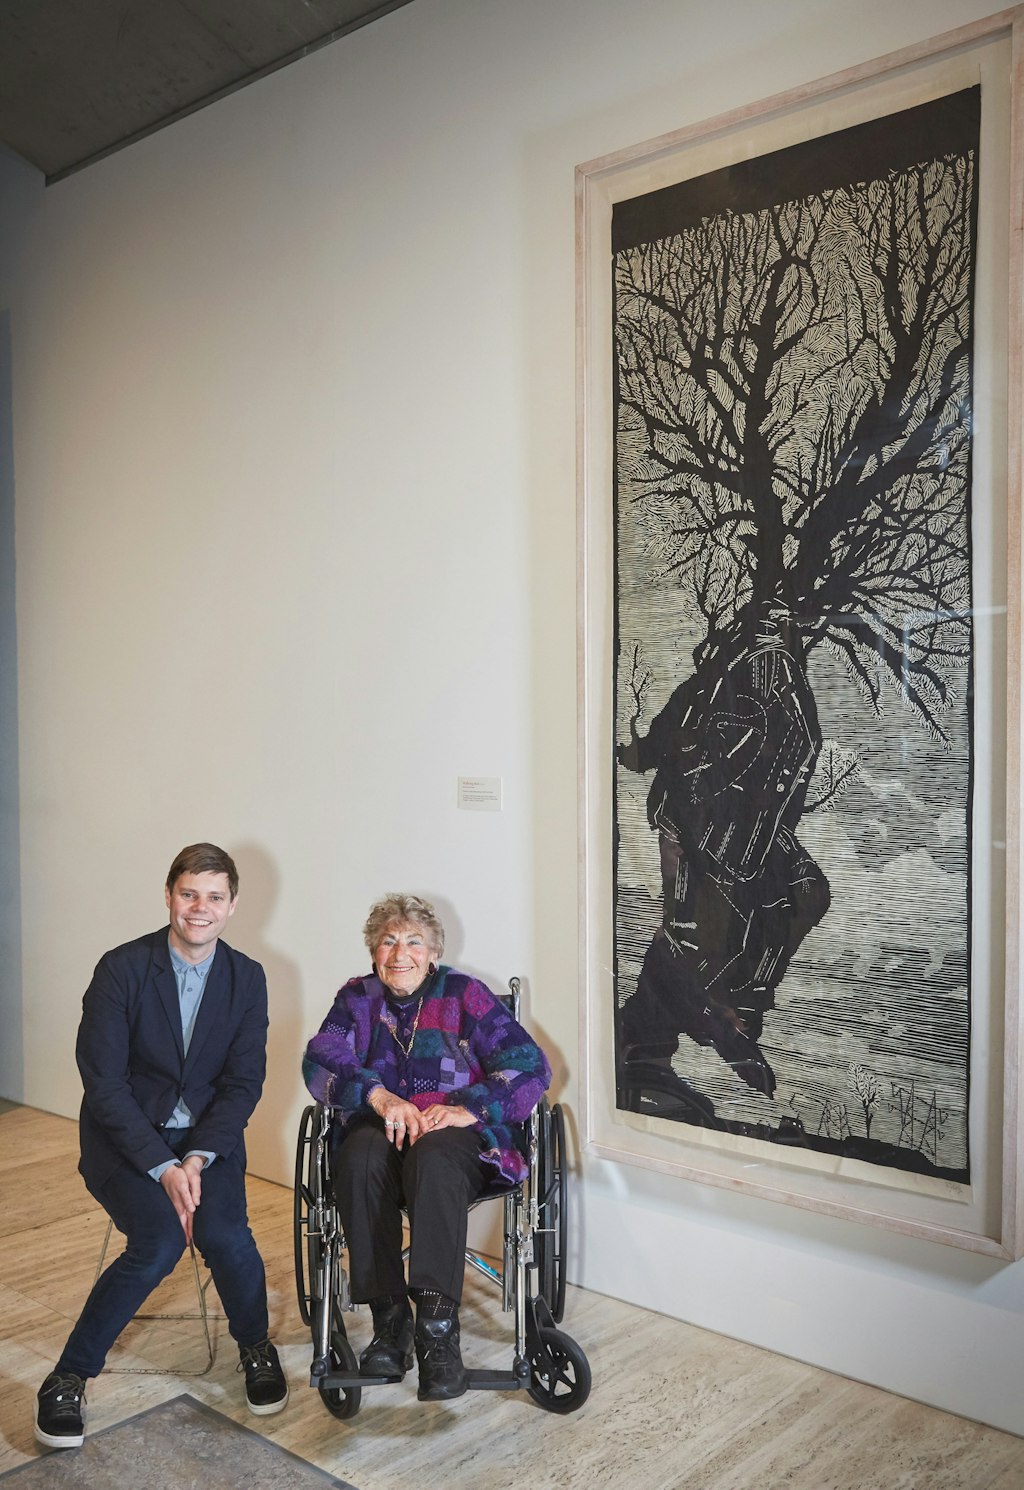 Two people sit next to a large black-and-white framed artwork depicting a figure that is part human, part tree